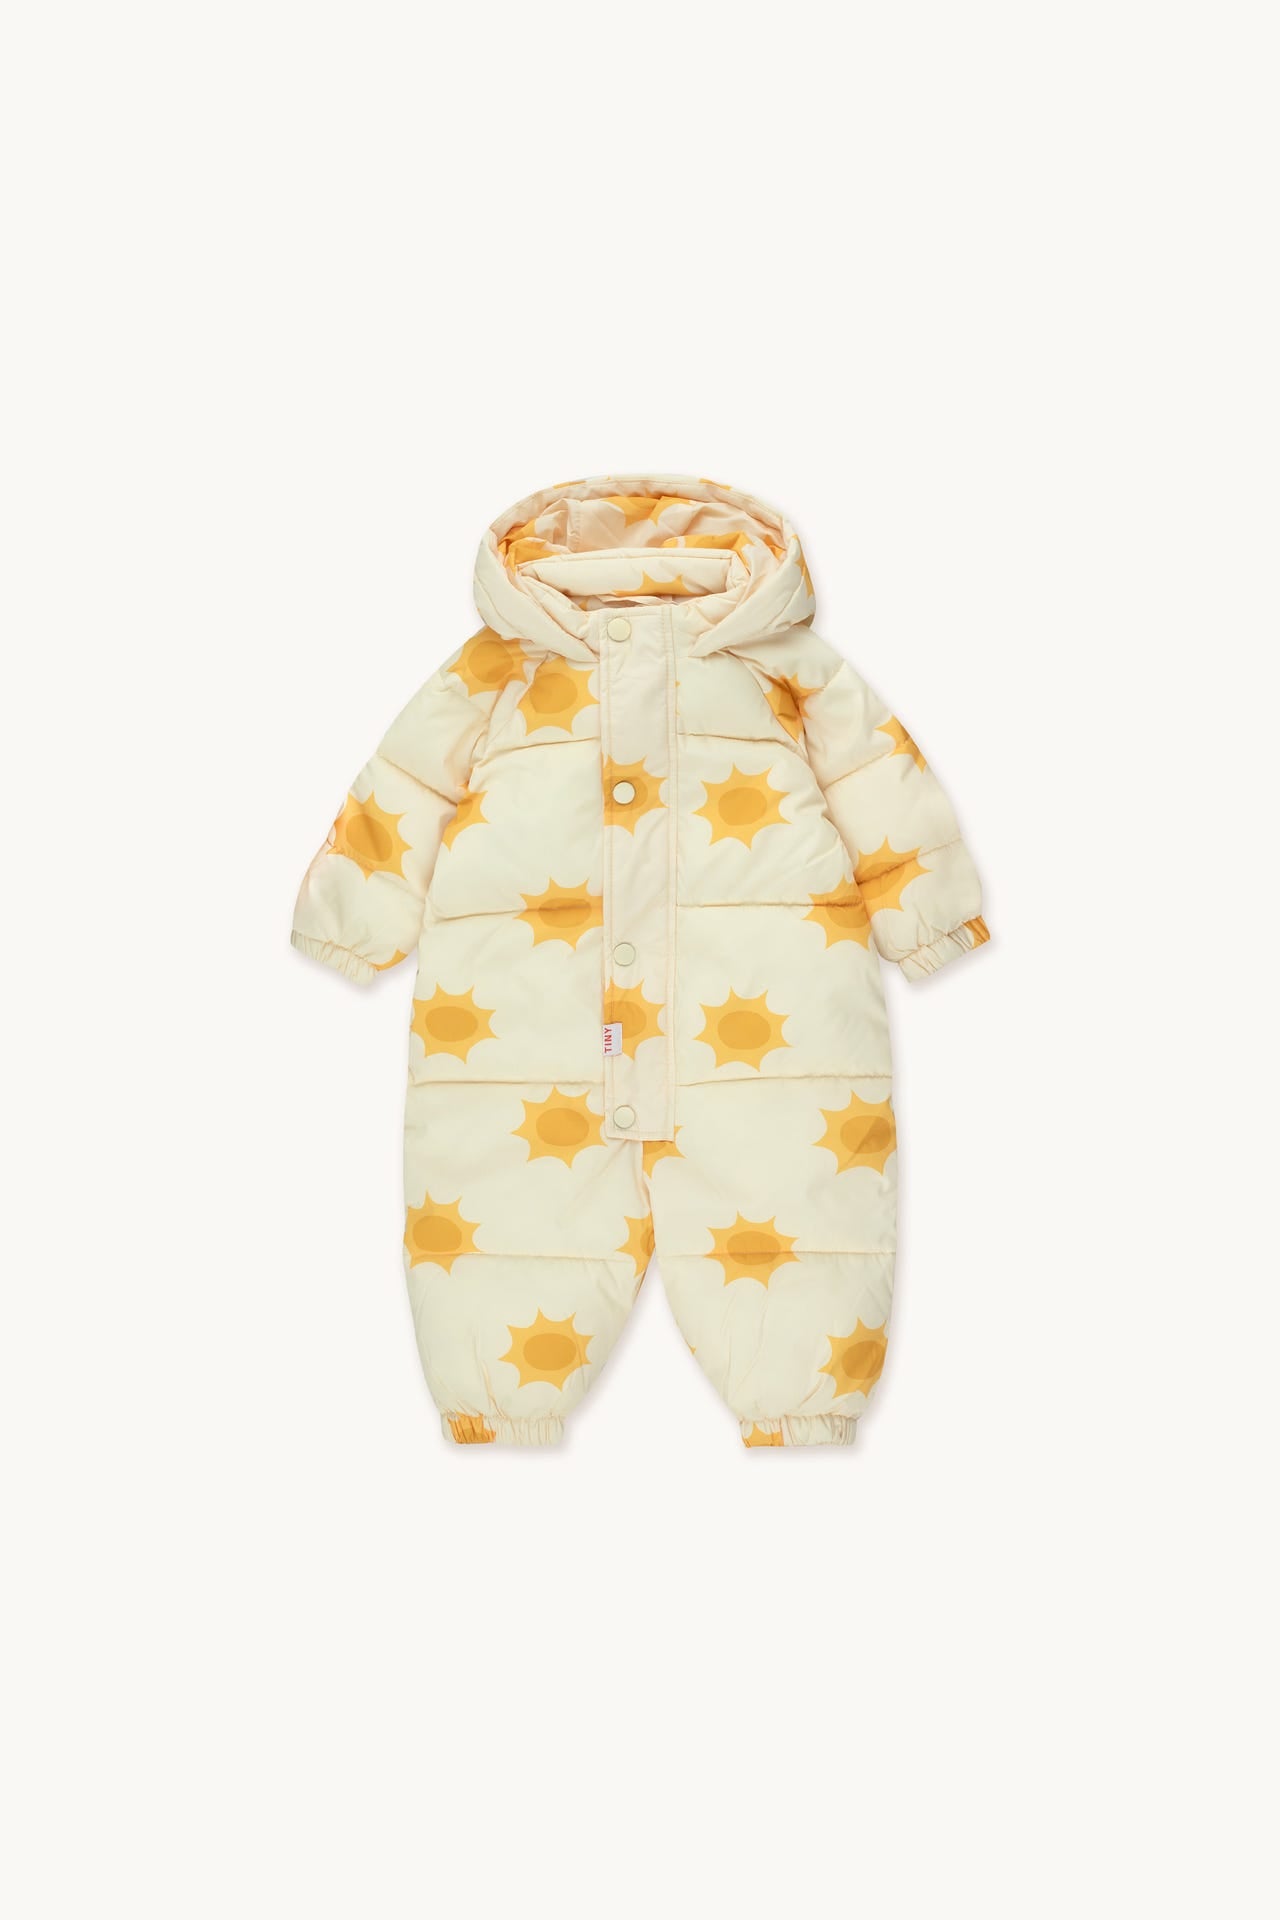 SUNNY PADDED OVERALL *dusty yellow*